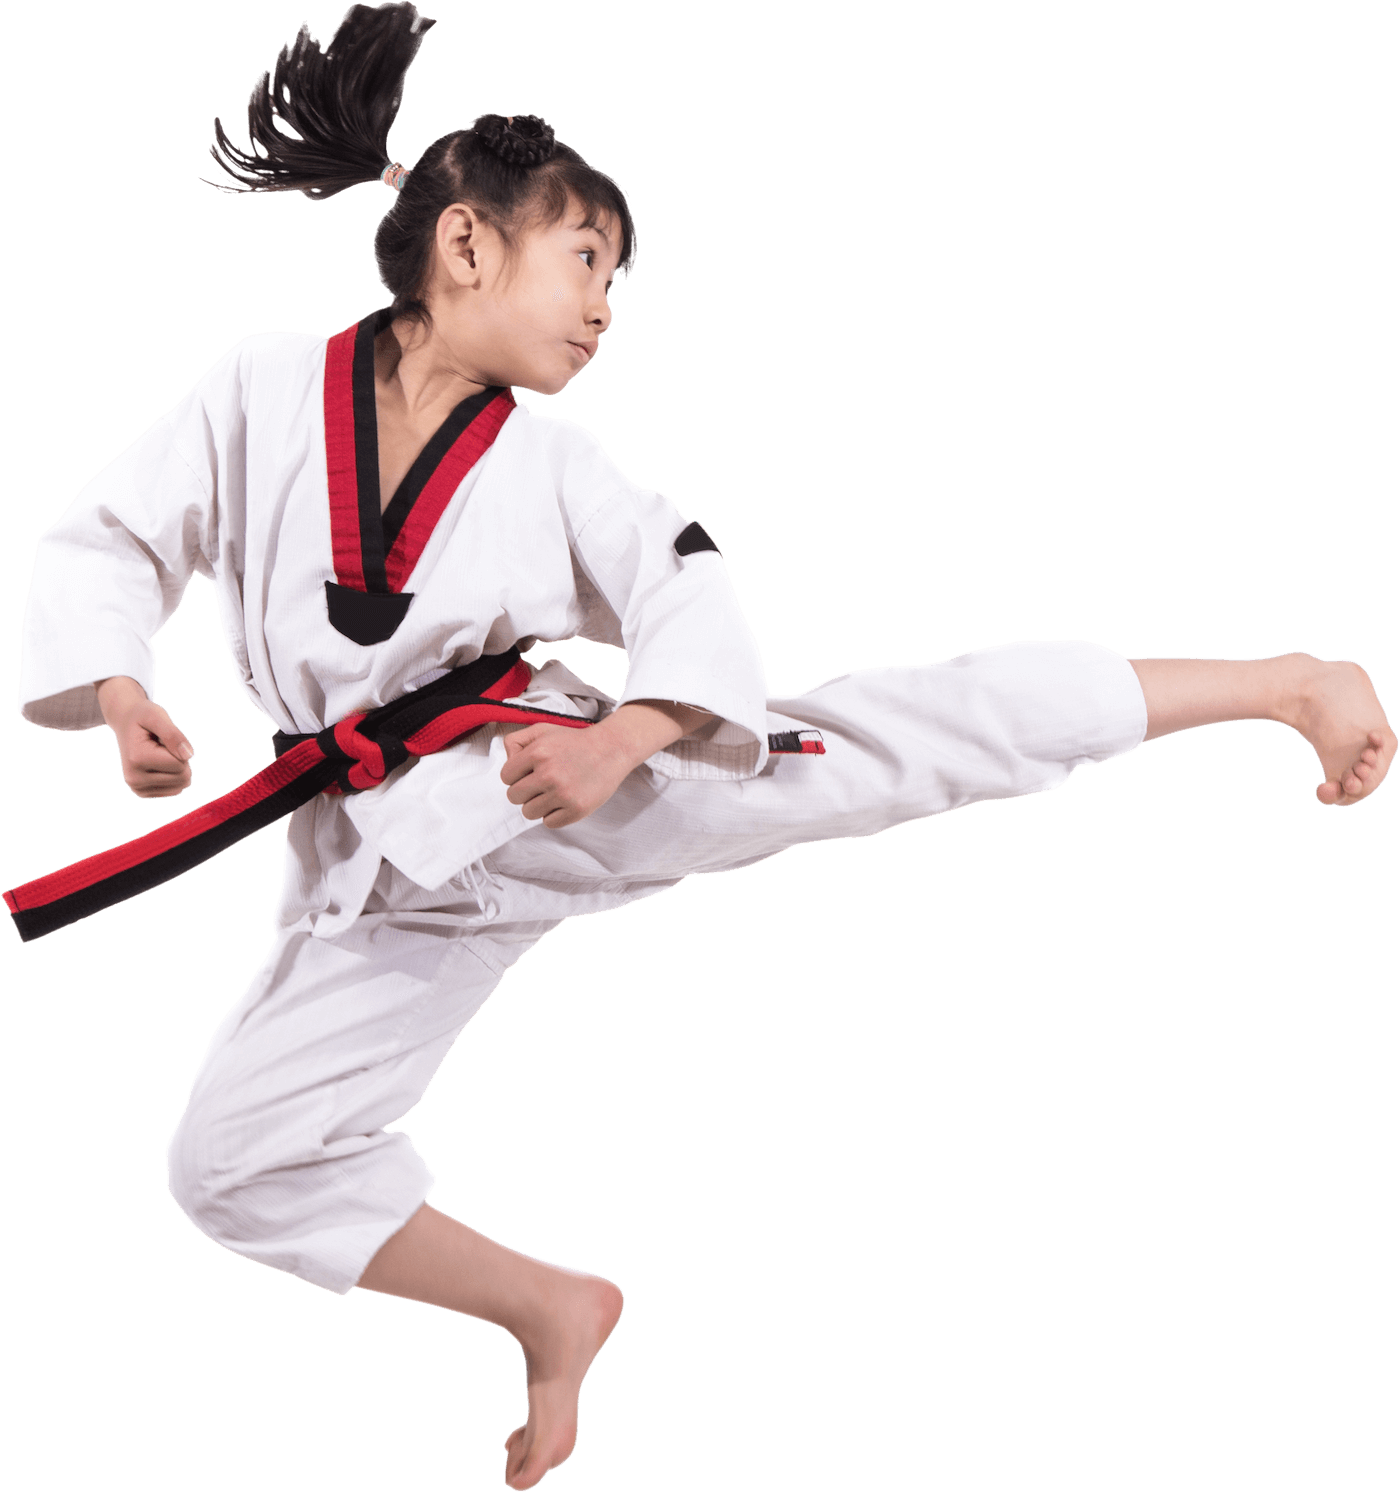 Youth practicing karate